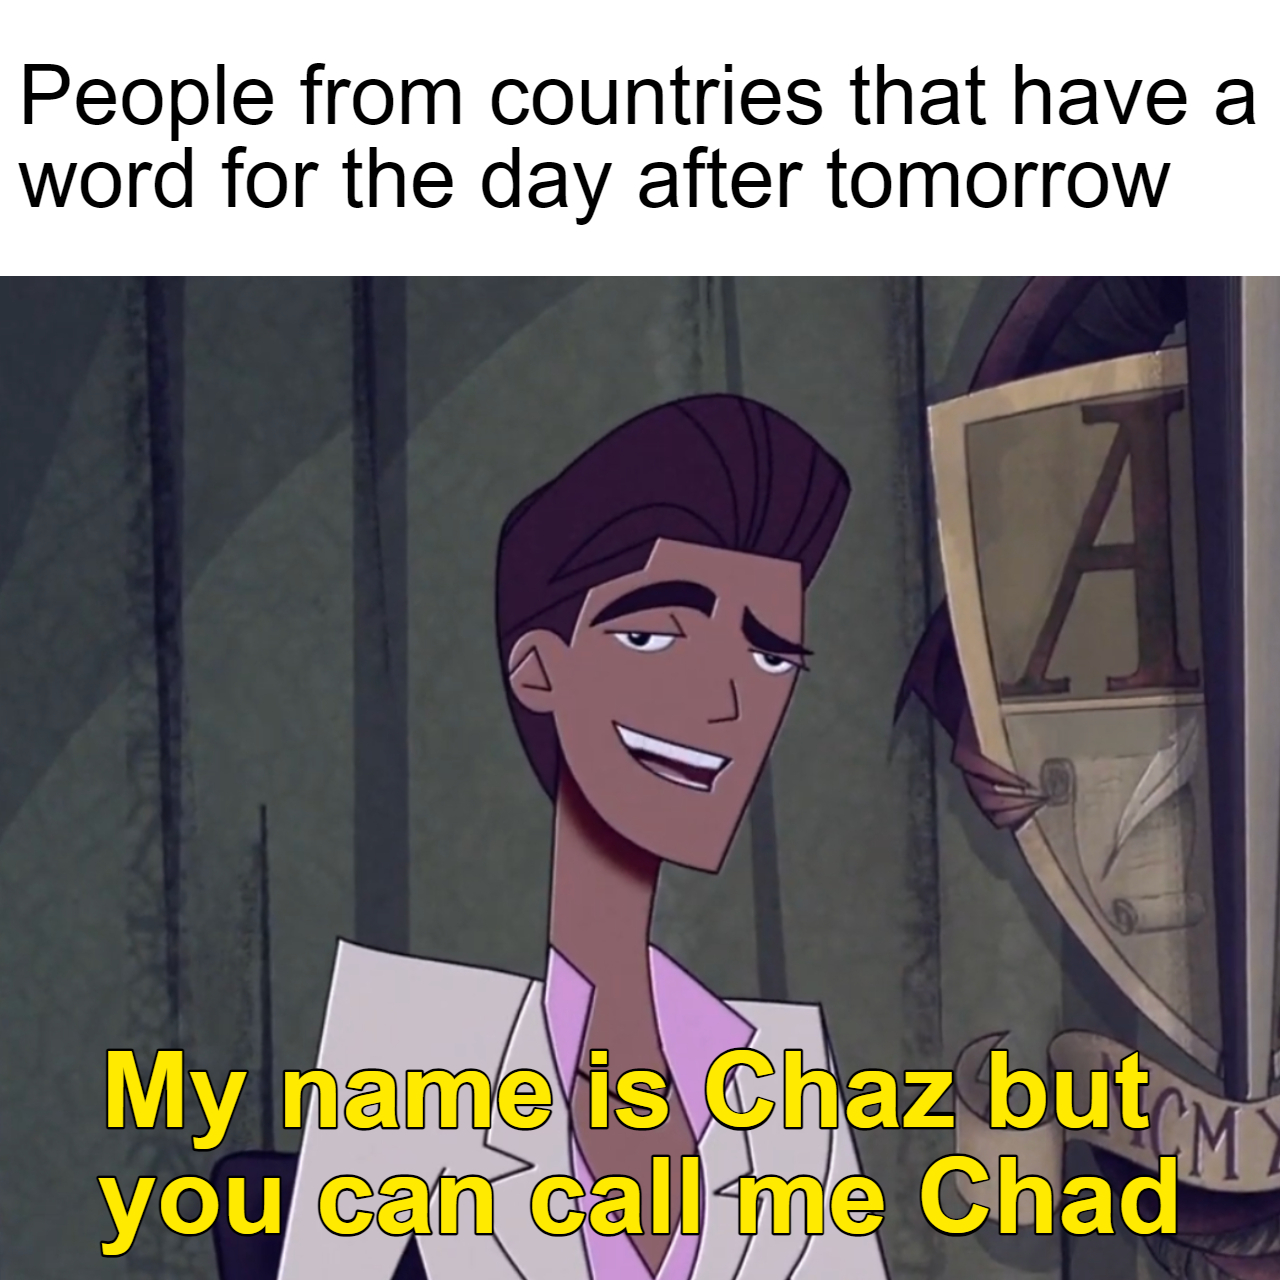 Internet meme - People from countries that have a word for the day after tomorrow A My name is Chaz but M you can call me Chad